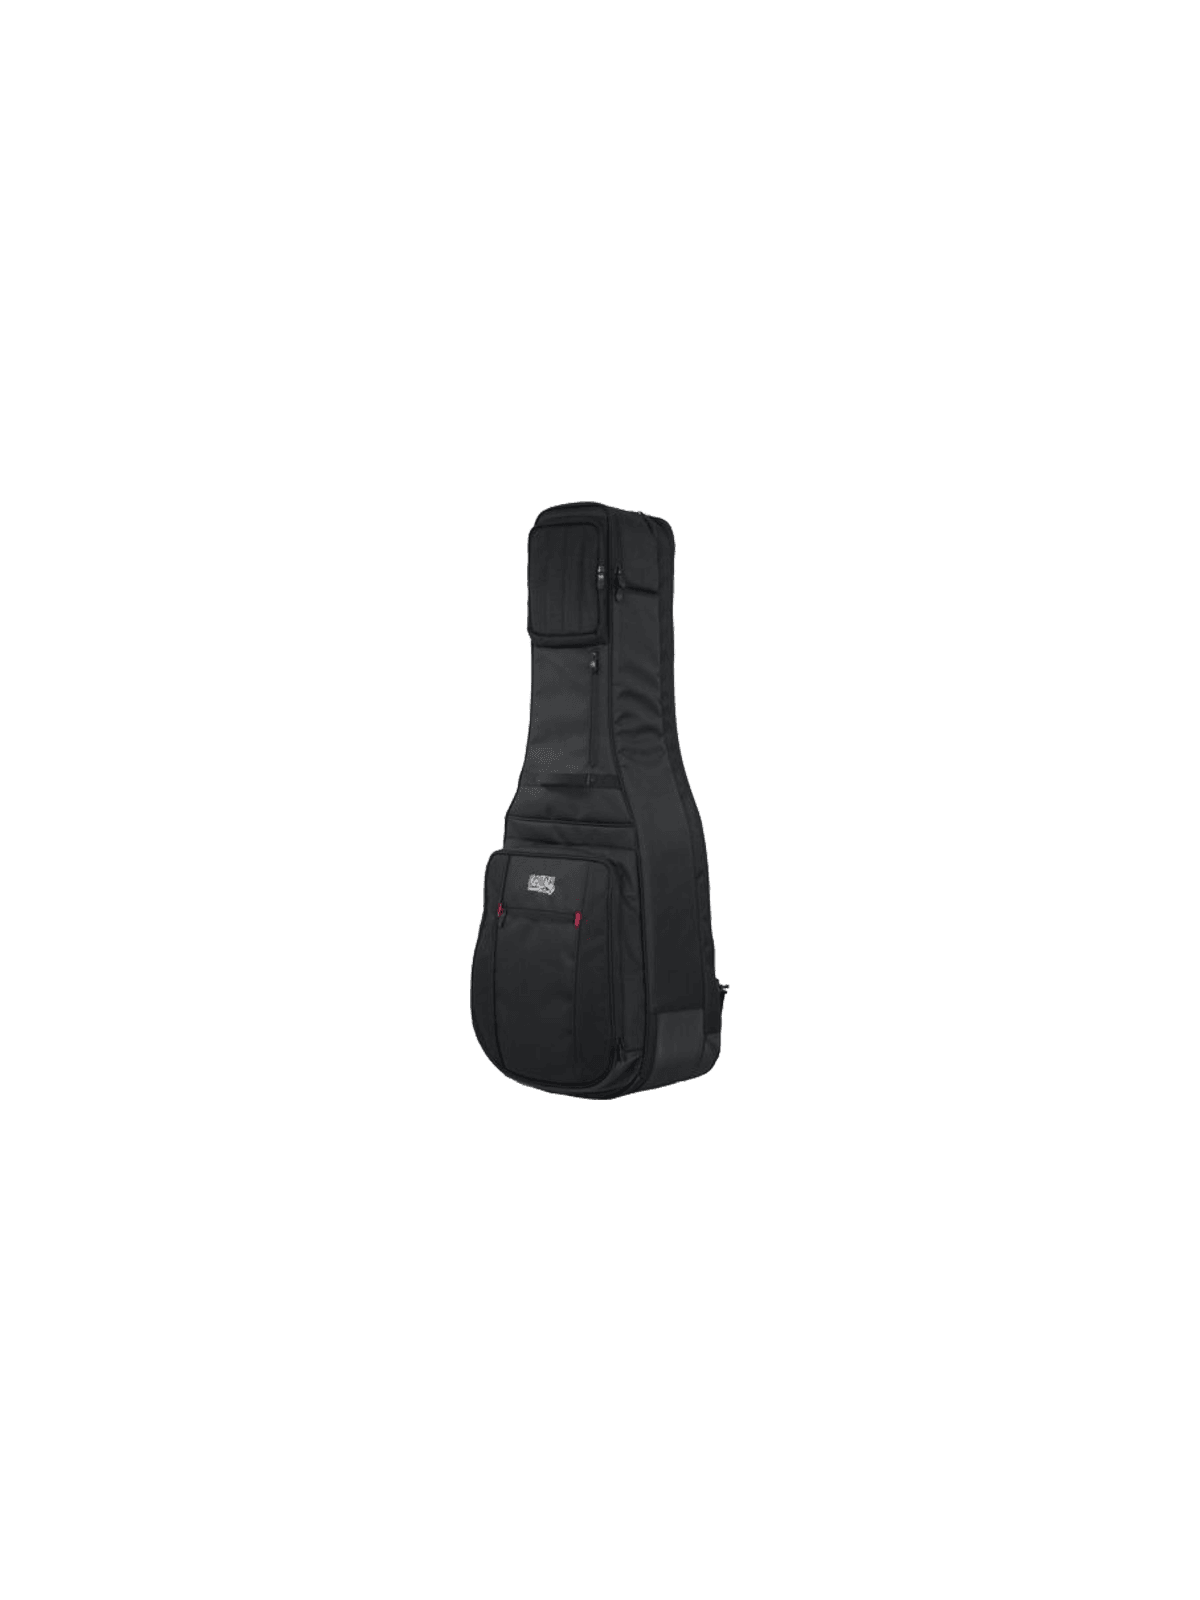 Gator - G-PG-ACOUELECT Pro Go